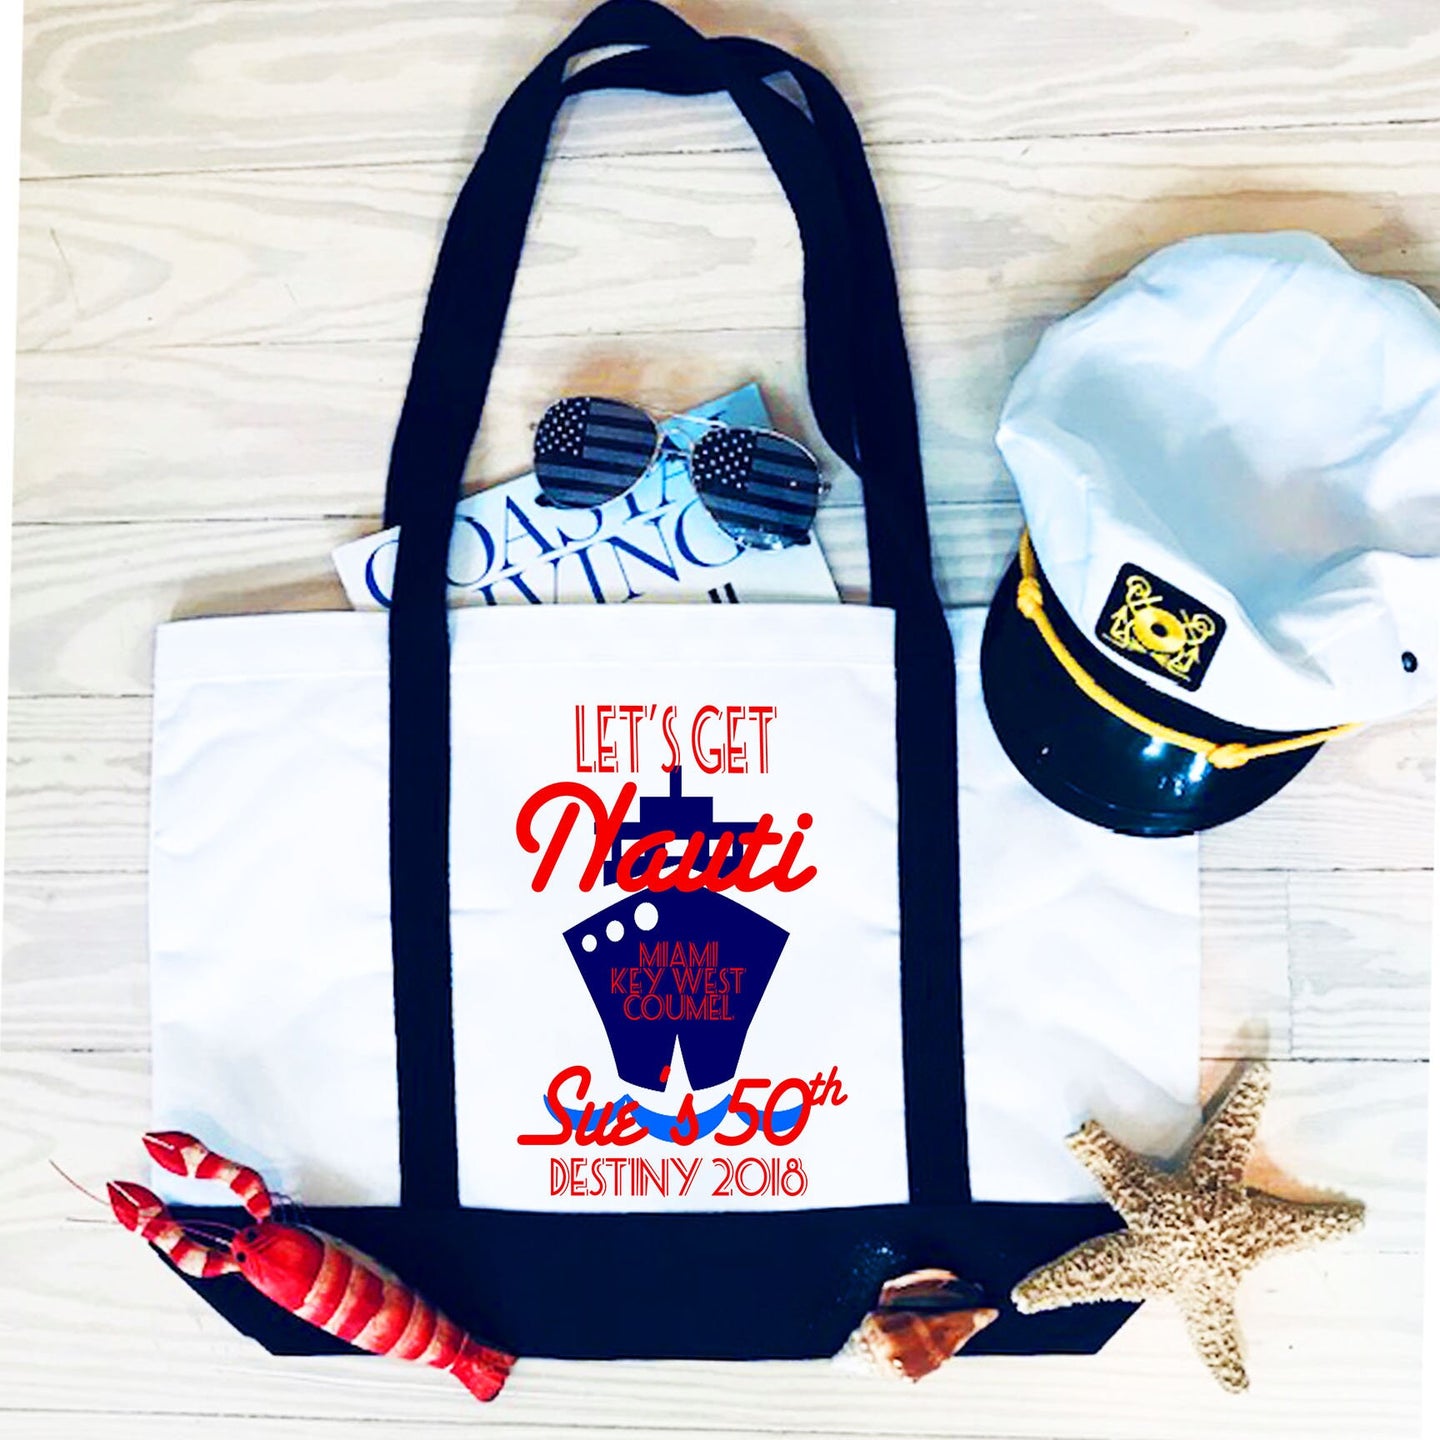 Cruise Tote Boat bag. Cruise Vacation Favors! Nautical Bachelorette or Girls Weekend Tote Bag. Nautical Wedding Welcome bag. Cruise Tote!